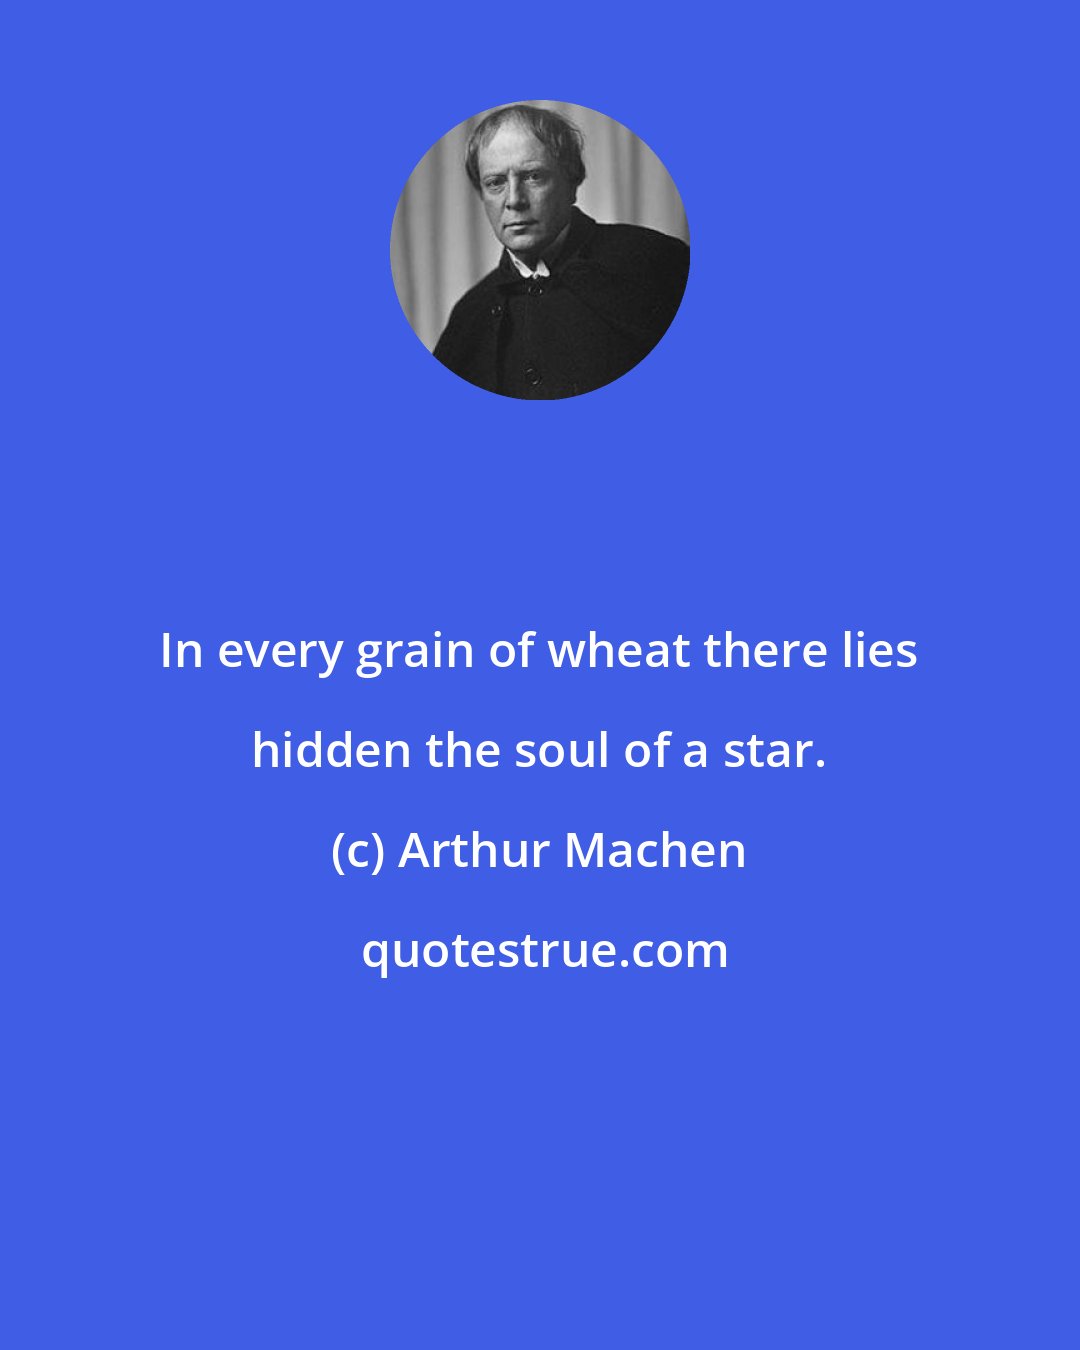 Arthur Machen: In every grain of wheat there lies hidden the soul of a star.